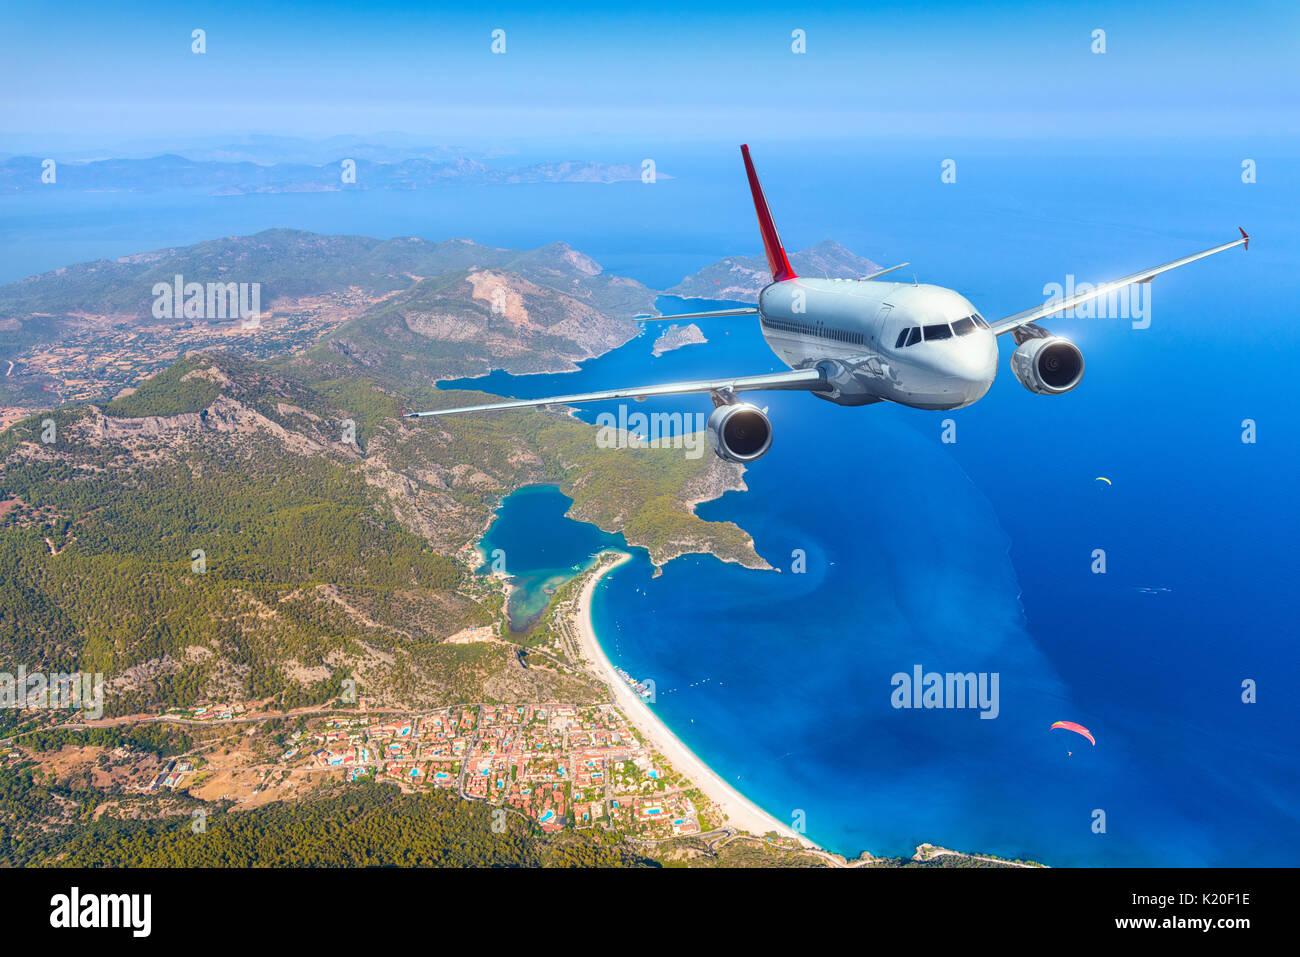 Airplane is flying over amazing islands and mediterranean sea at bright day. Landscape with white passenger airplane, mountains and blue water. Passen Stock Photo